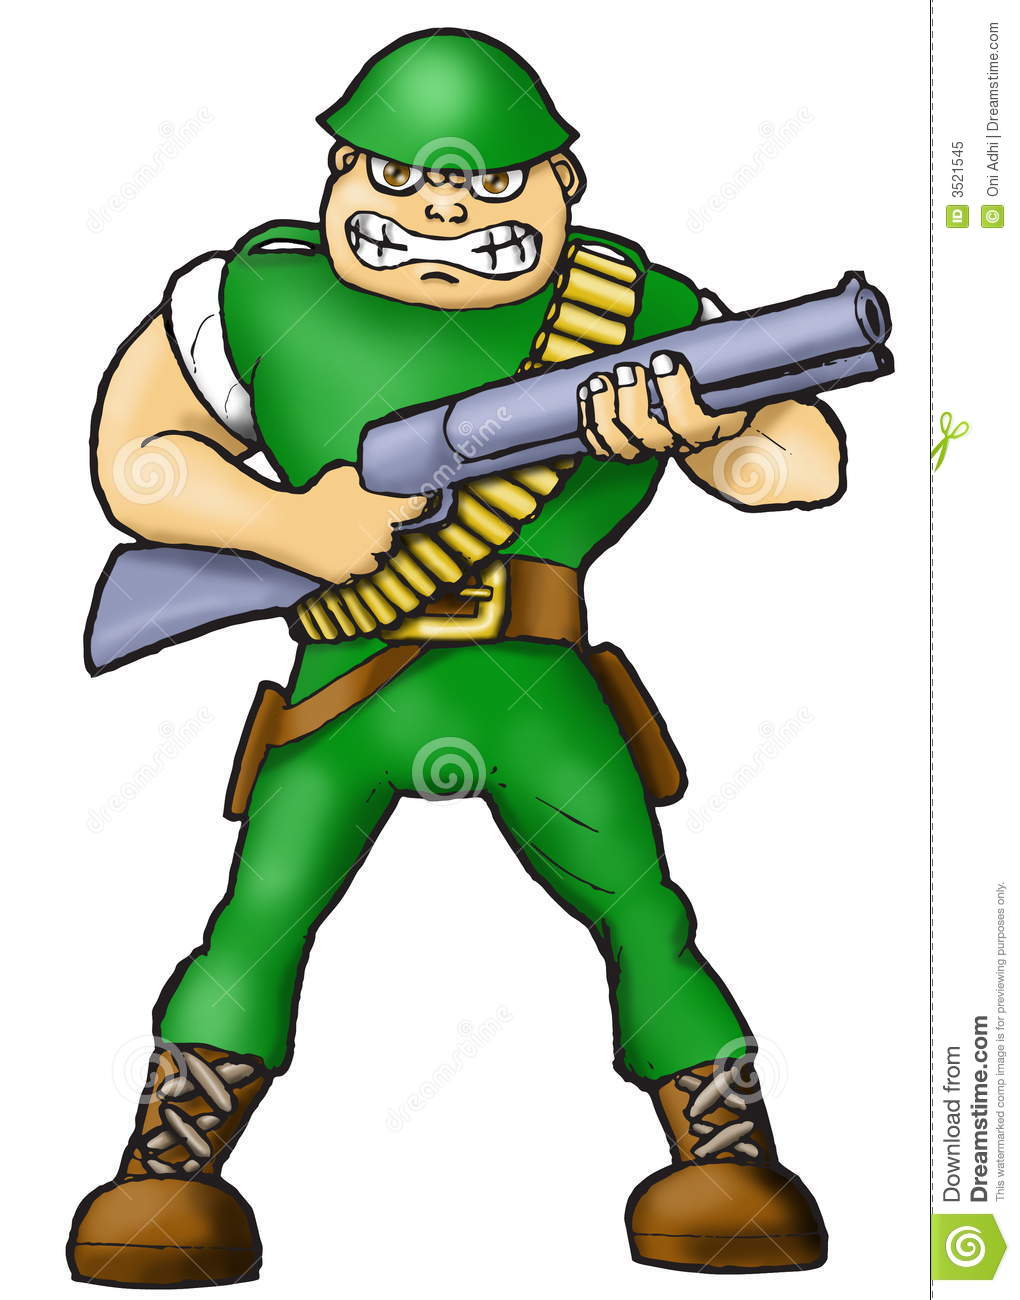 Angry Soldier Royalty Free Stock Photo   Image  3521545